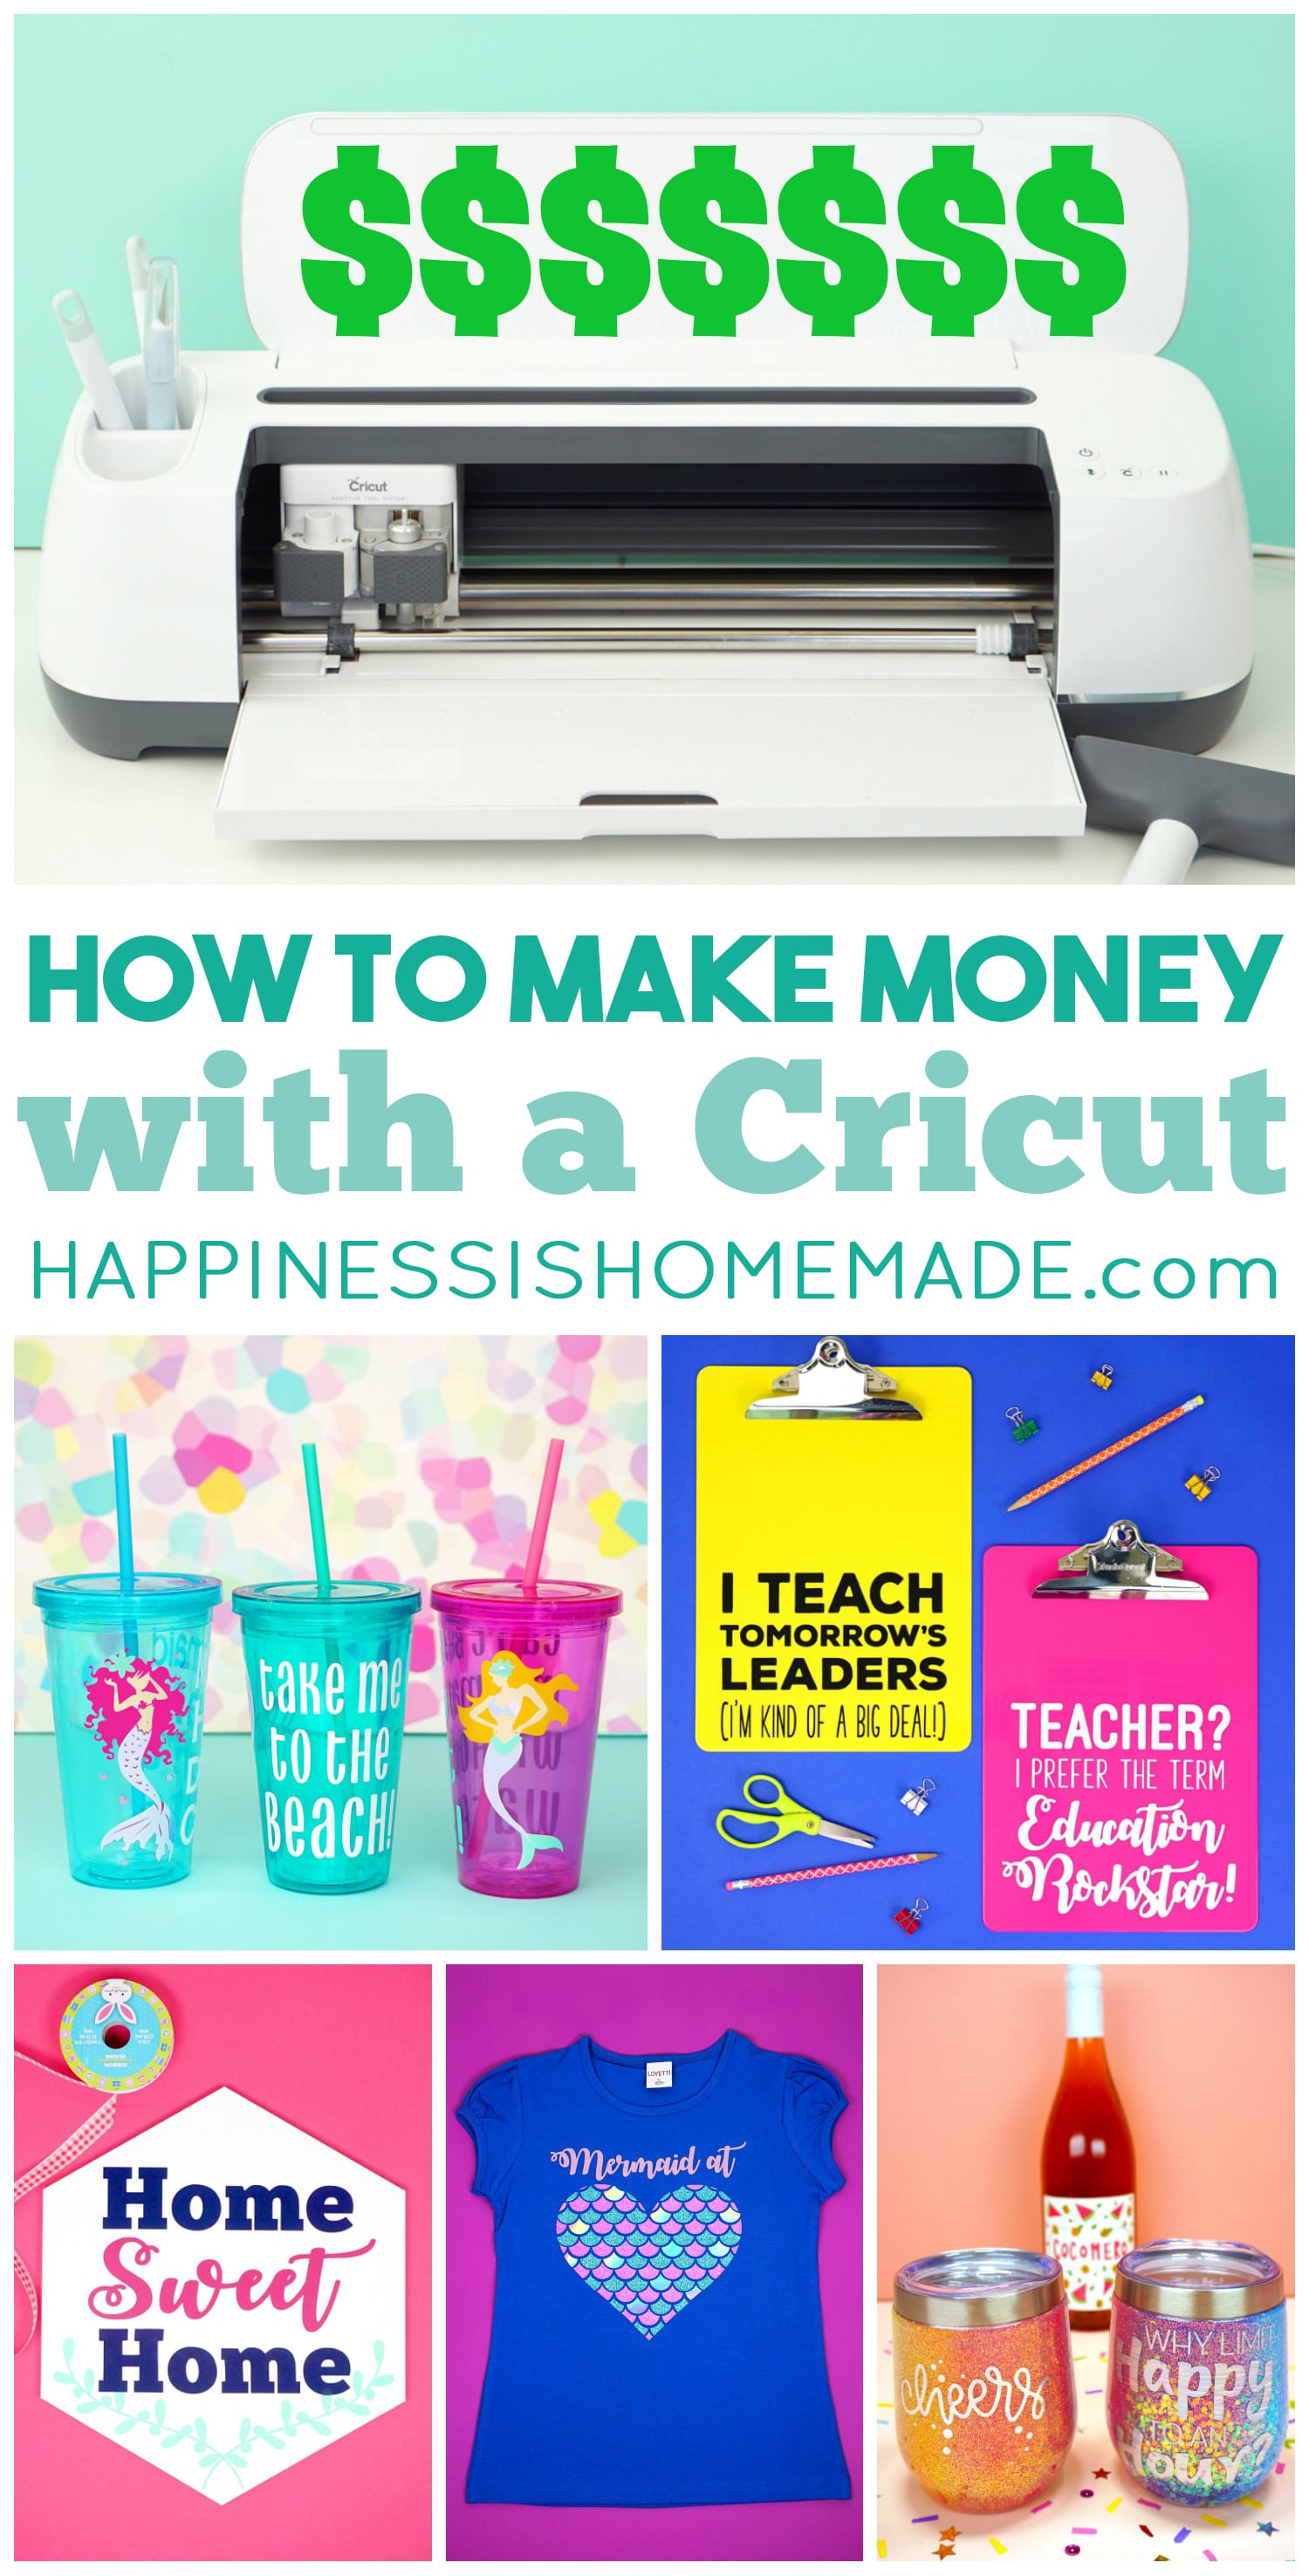 How to Make Money with a Cricut - Happiness is Homemade